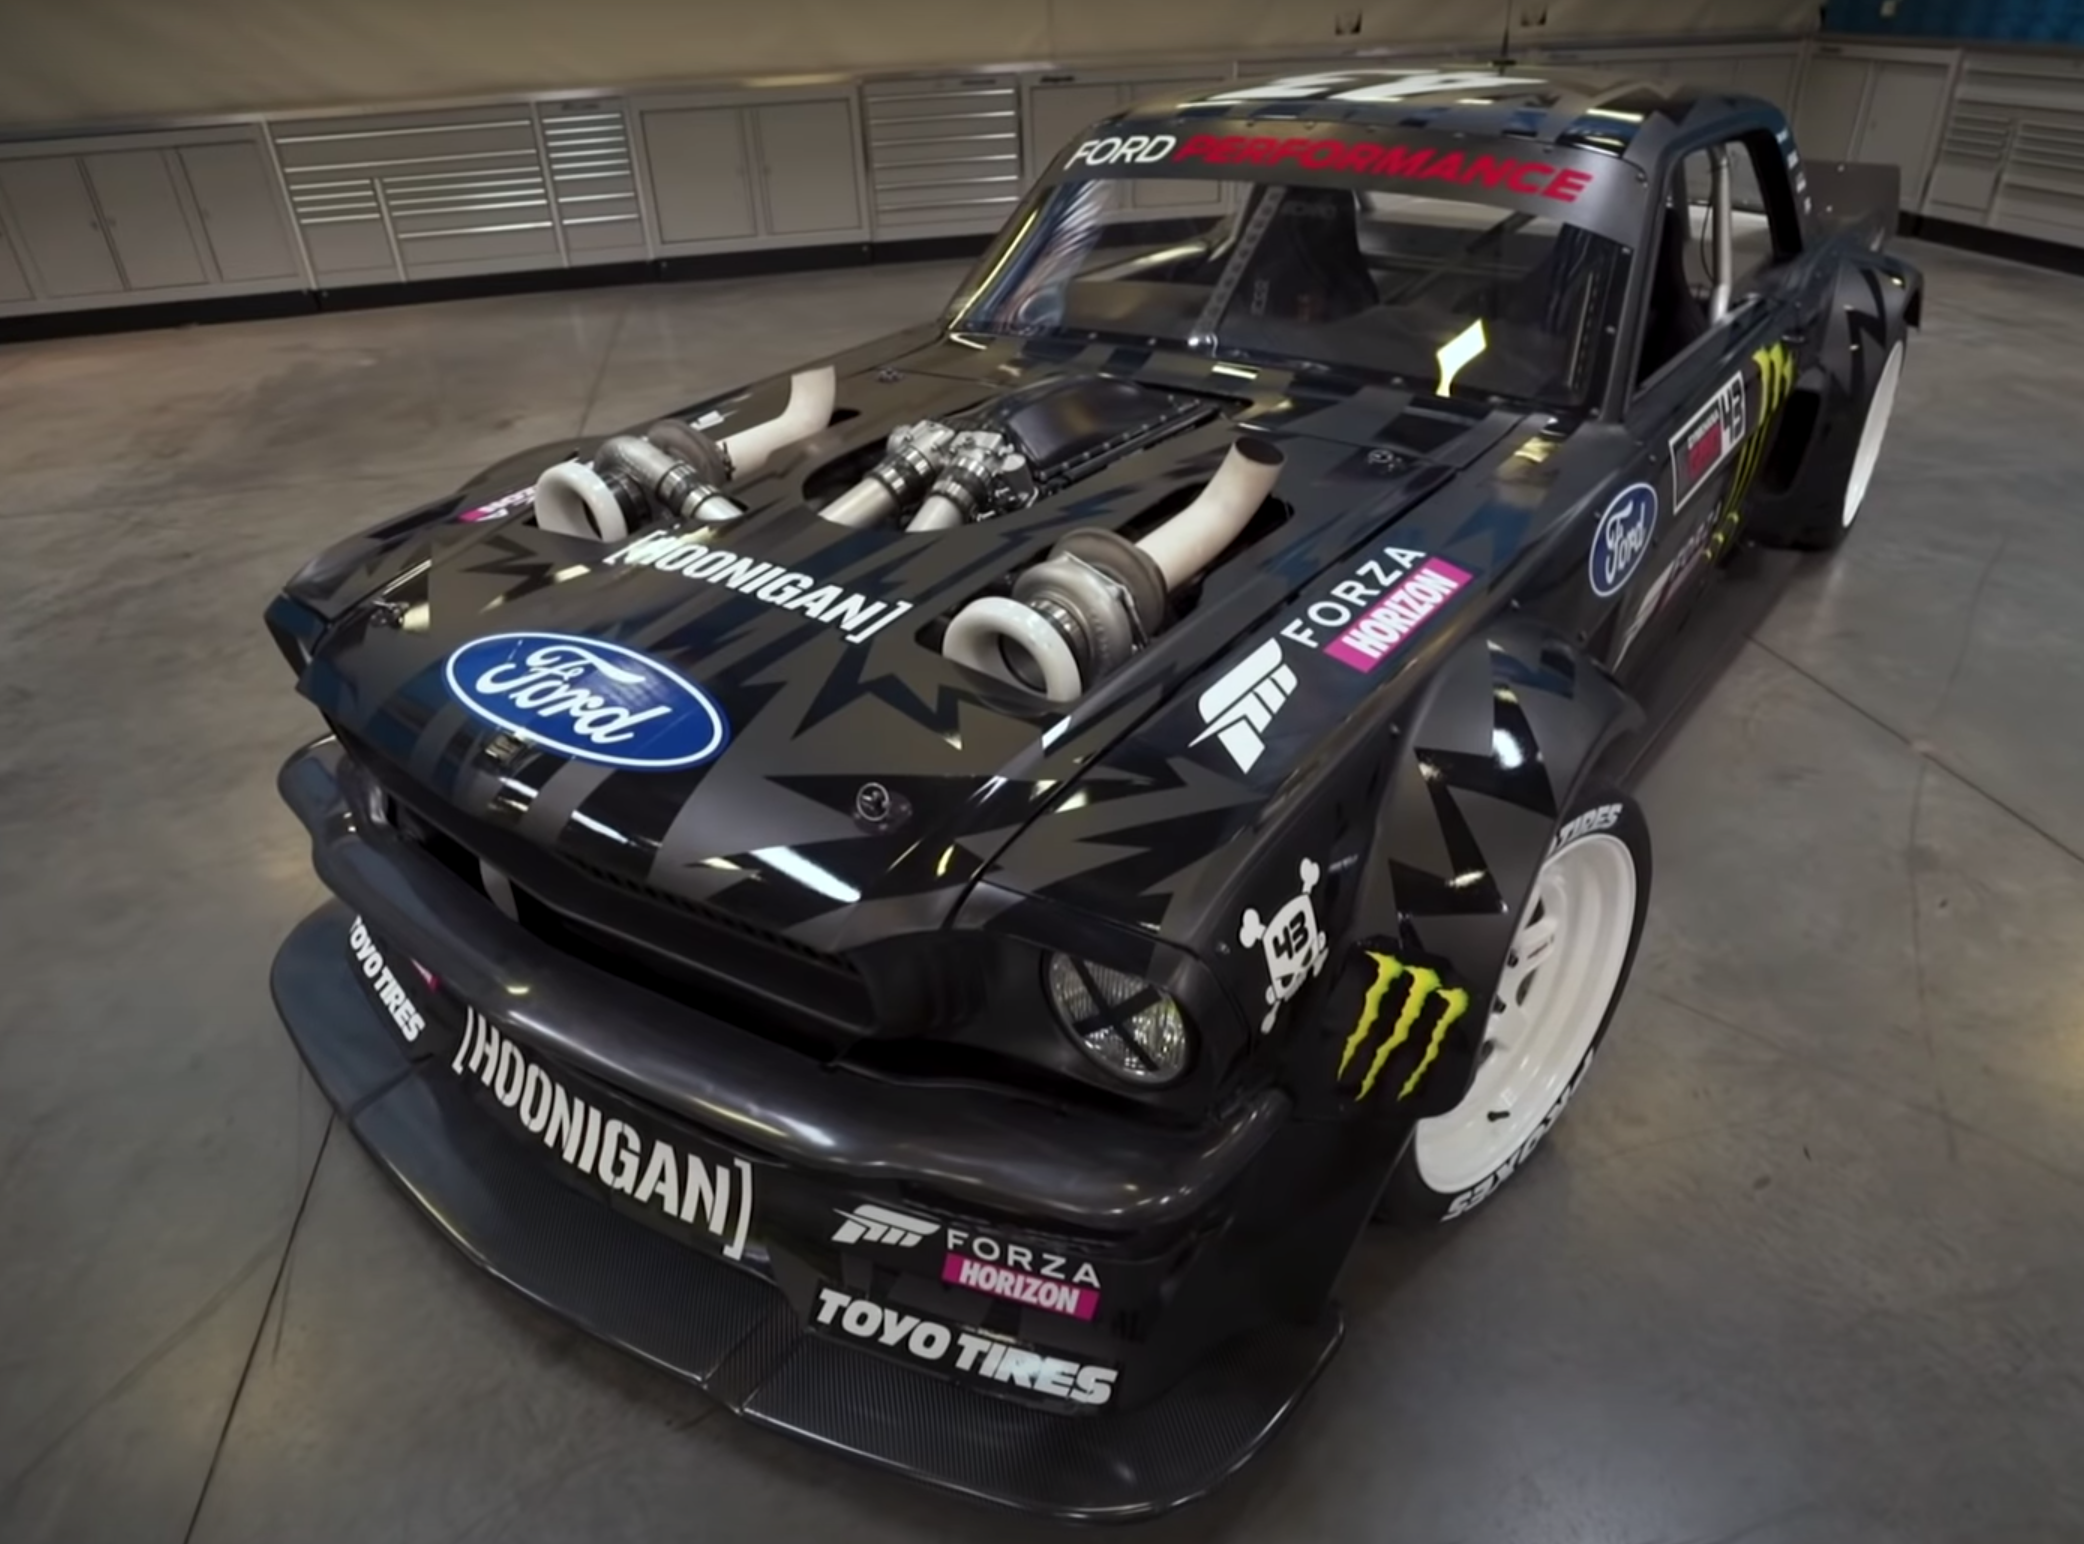 <img src="1965-mustang.png" alt="1965 Ford Mustang RTR - The Hoonicorn">